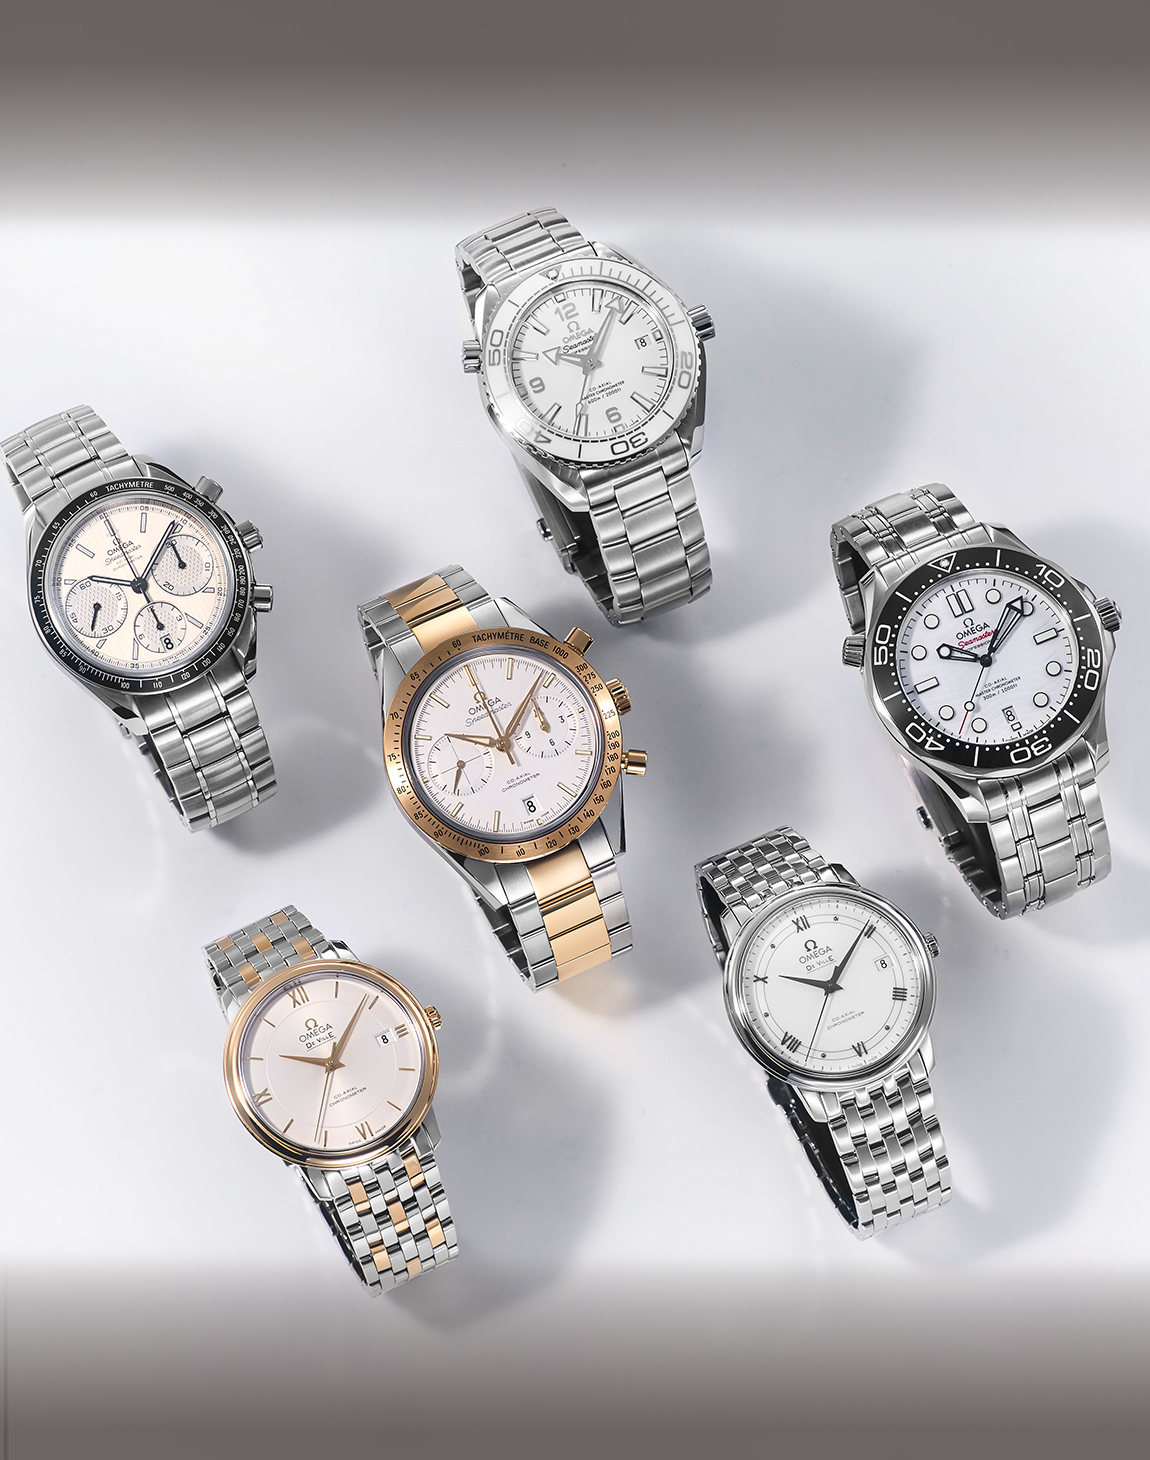 OMEGA WHITE COLLECTION オメガホワイトコレクション